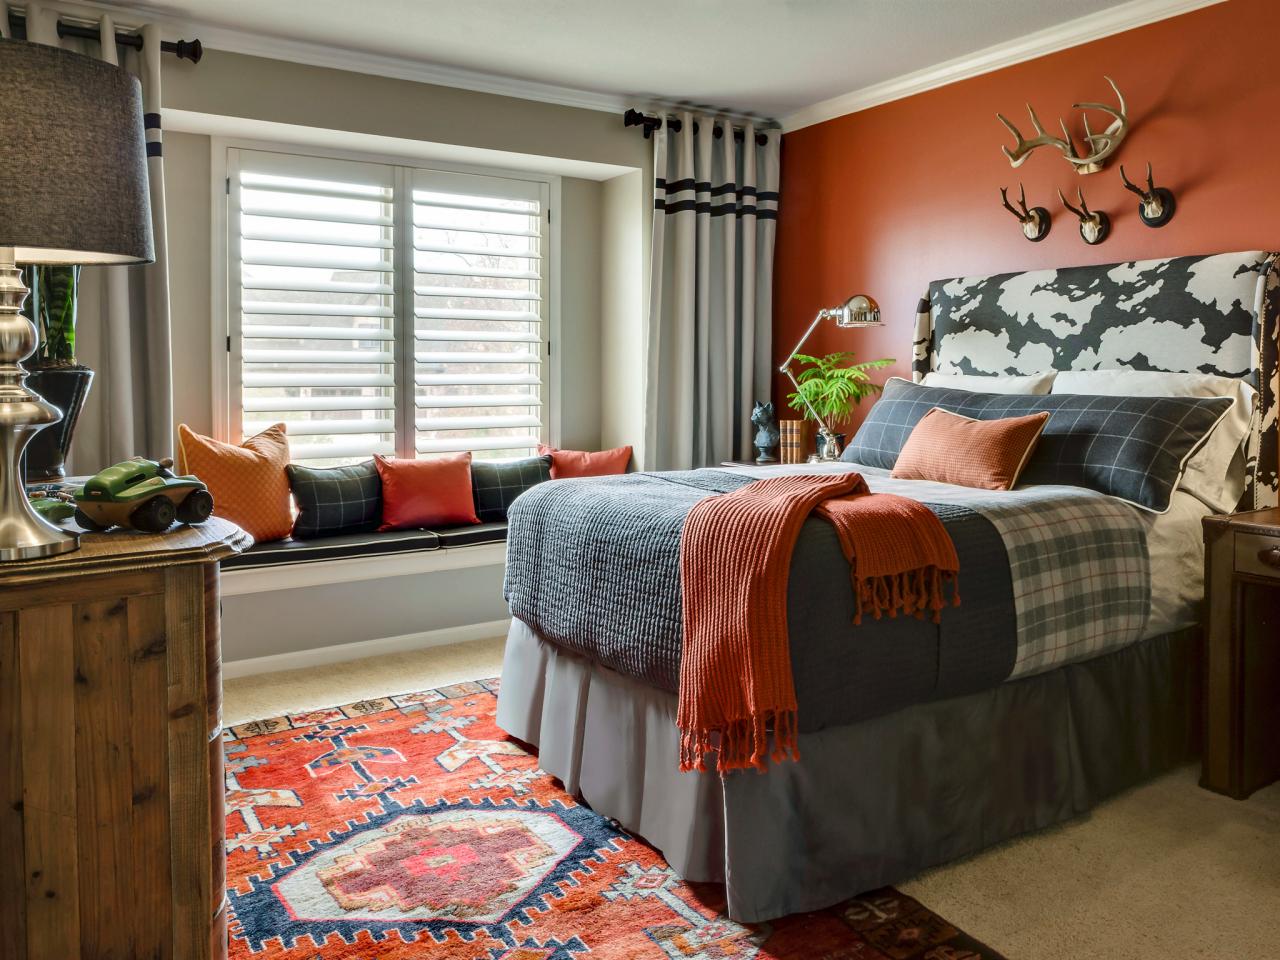 Teenage Bedroom Color Schemes Pictures Options Ideas HGTV